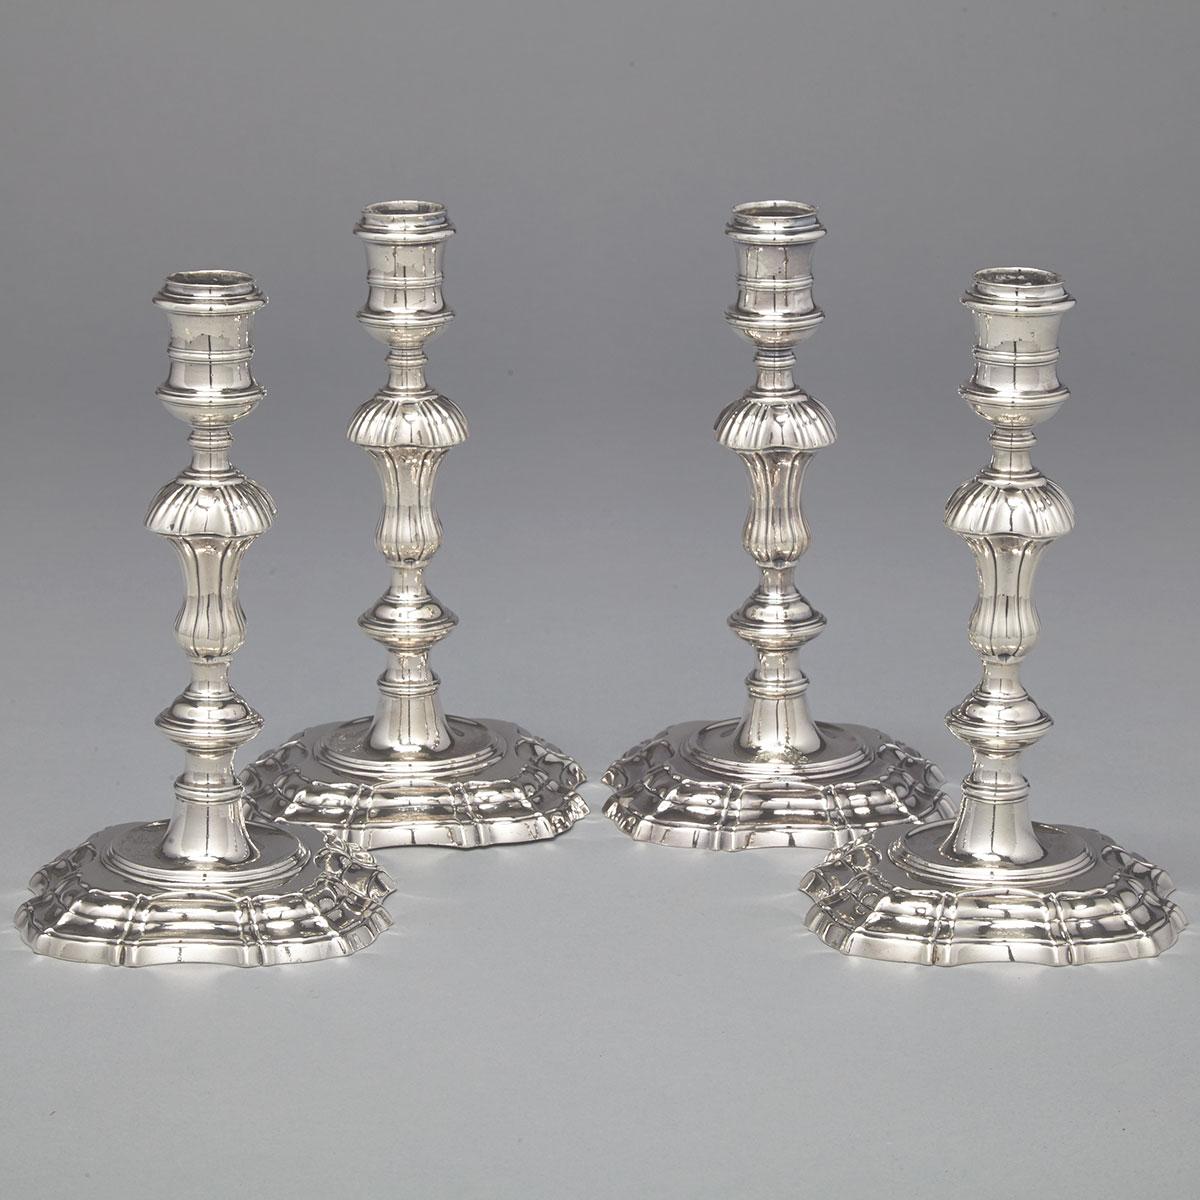 Set of Four George II Silver Table Candlesticks, John Cafe, London, 1742